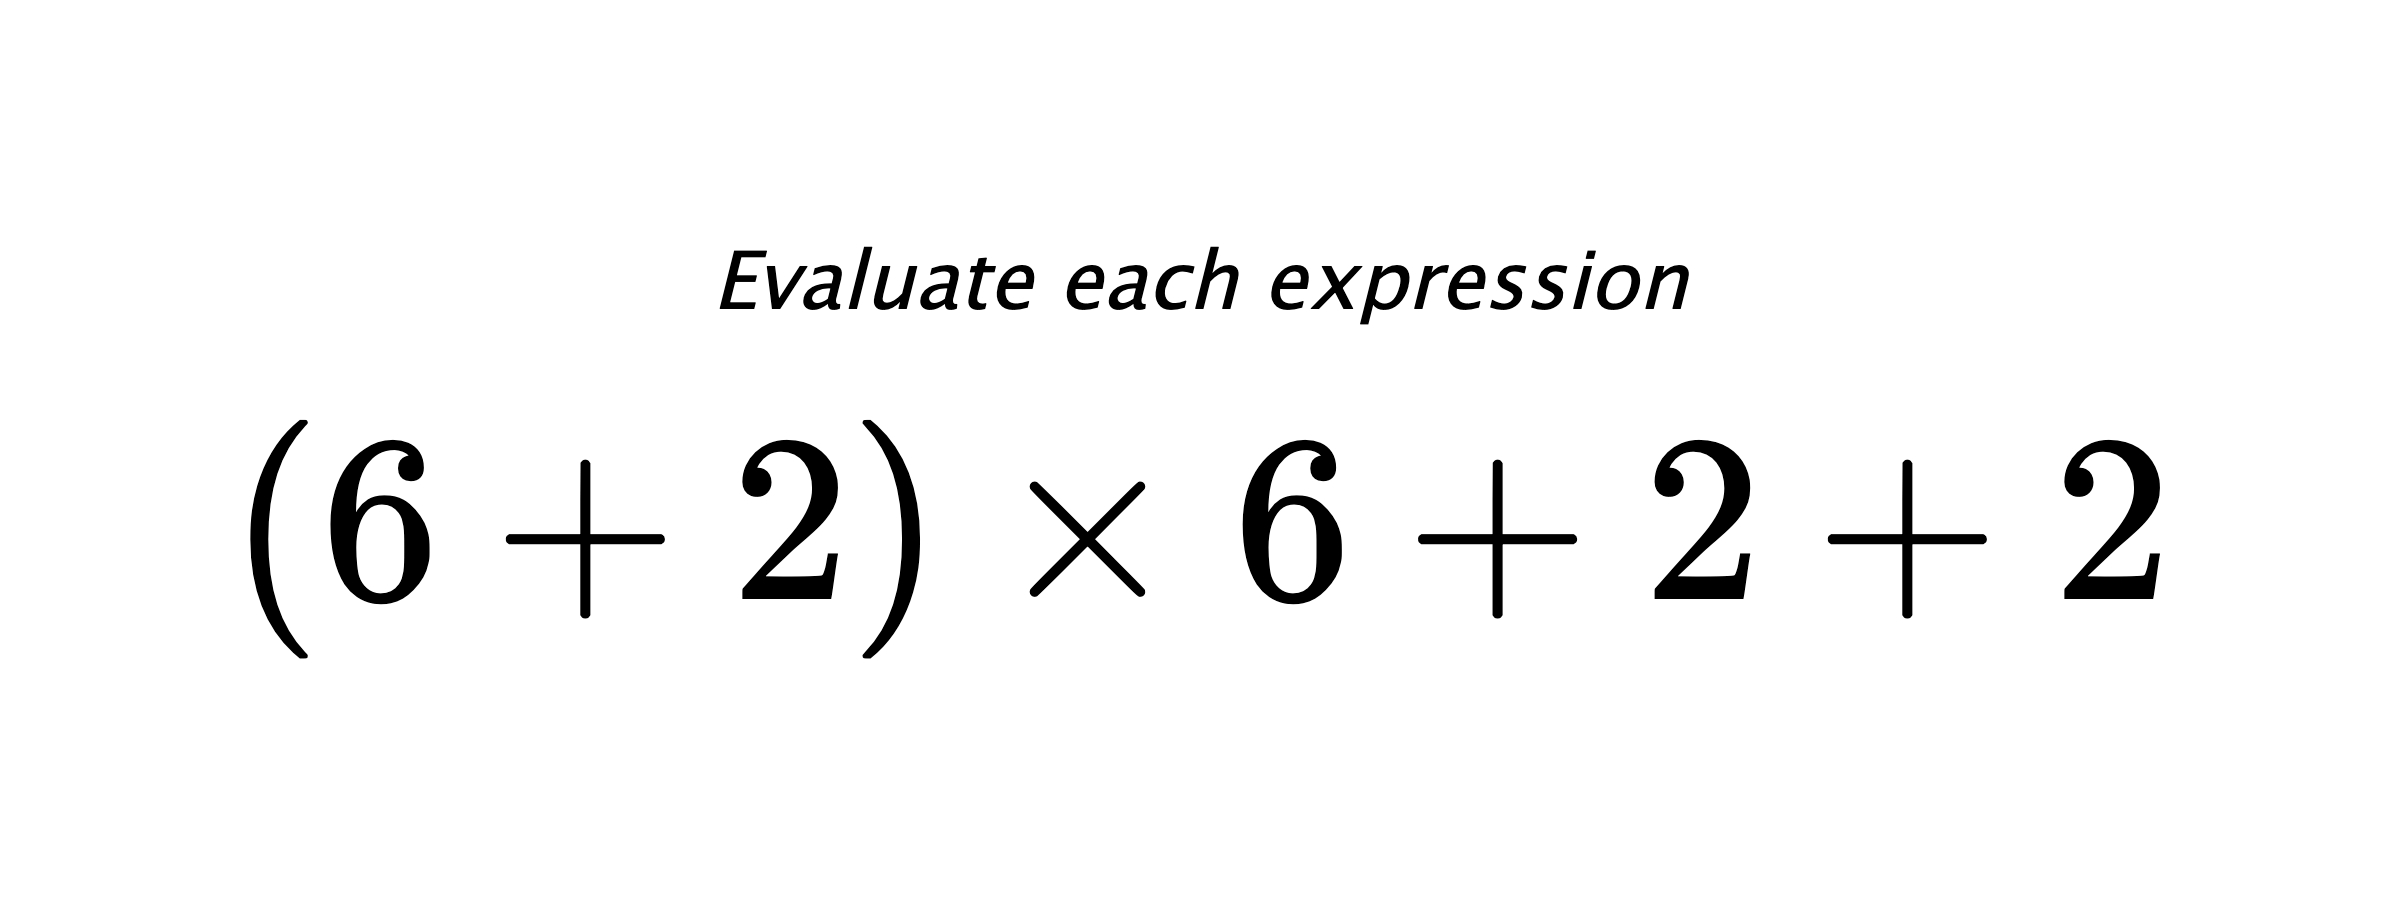 Evaluate each expression $ (6+2) \times 6 + 2 + 2 $